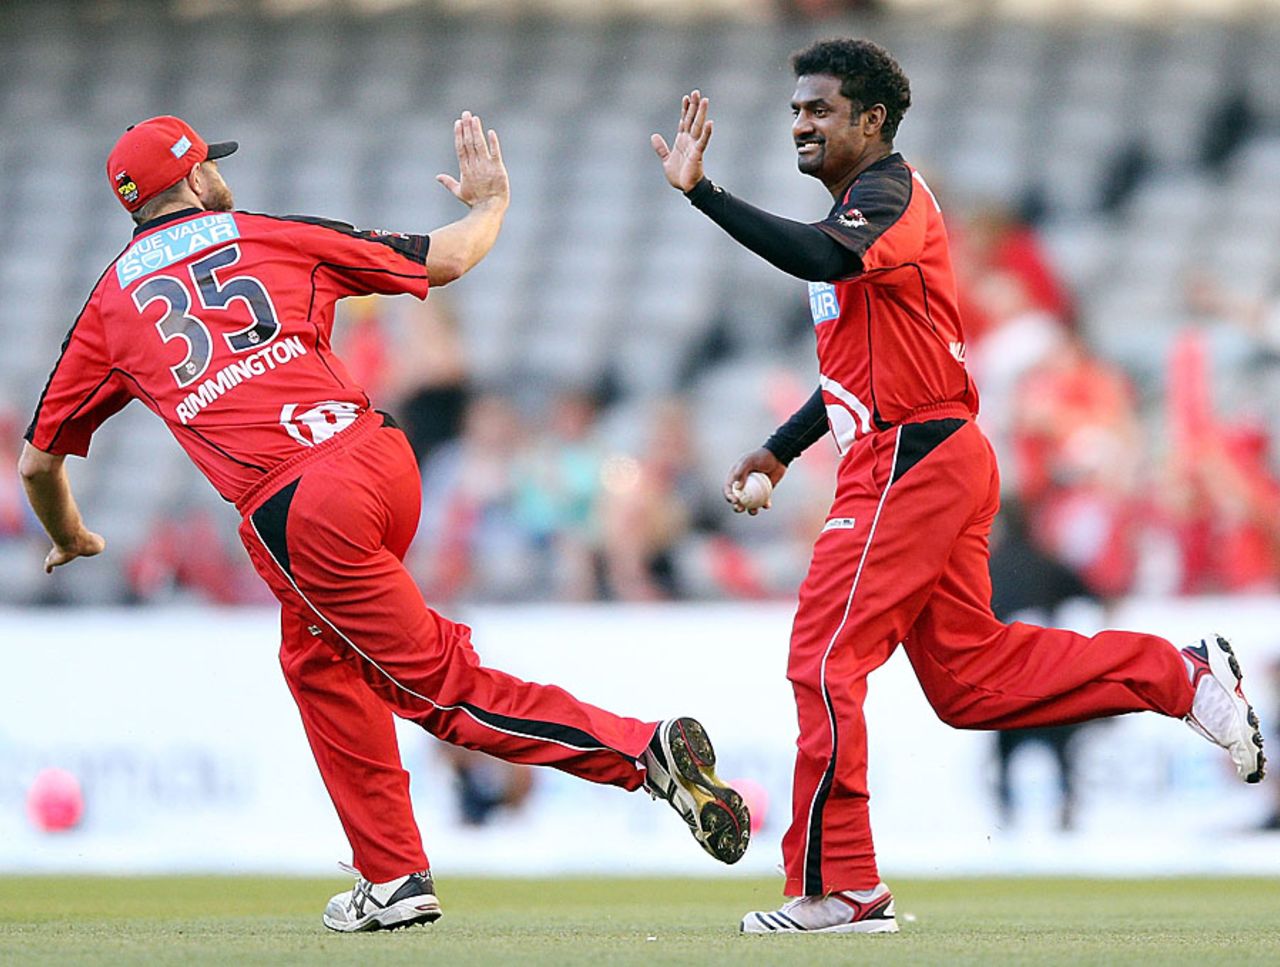 Muttiah Muralitharan bowled an economical spell and took two wickets, Melbourne Renegades v Brisbane Heat, Big Bash League, Docklands Stadium, Melbourne, December 22, 2012